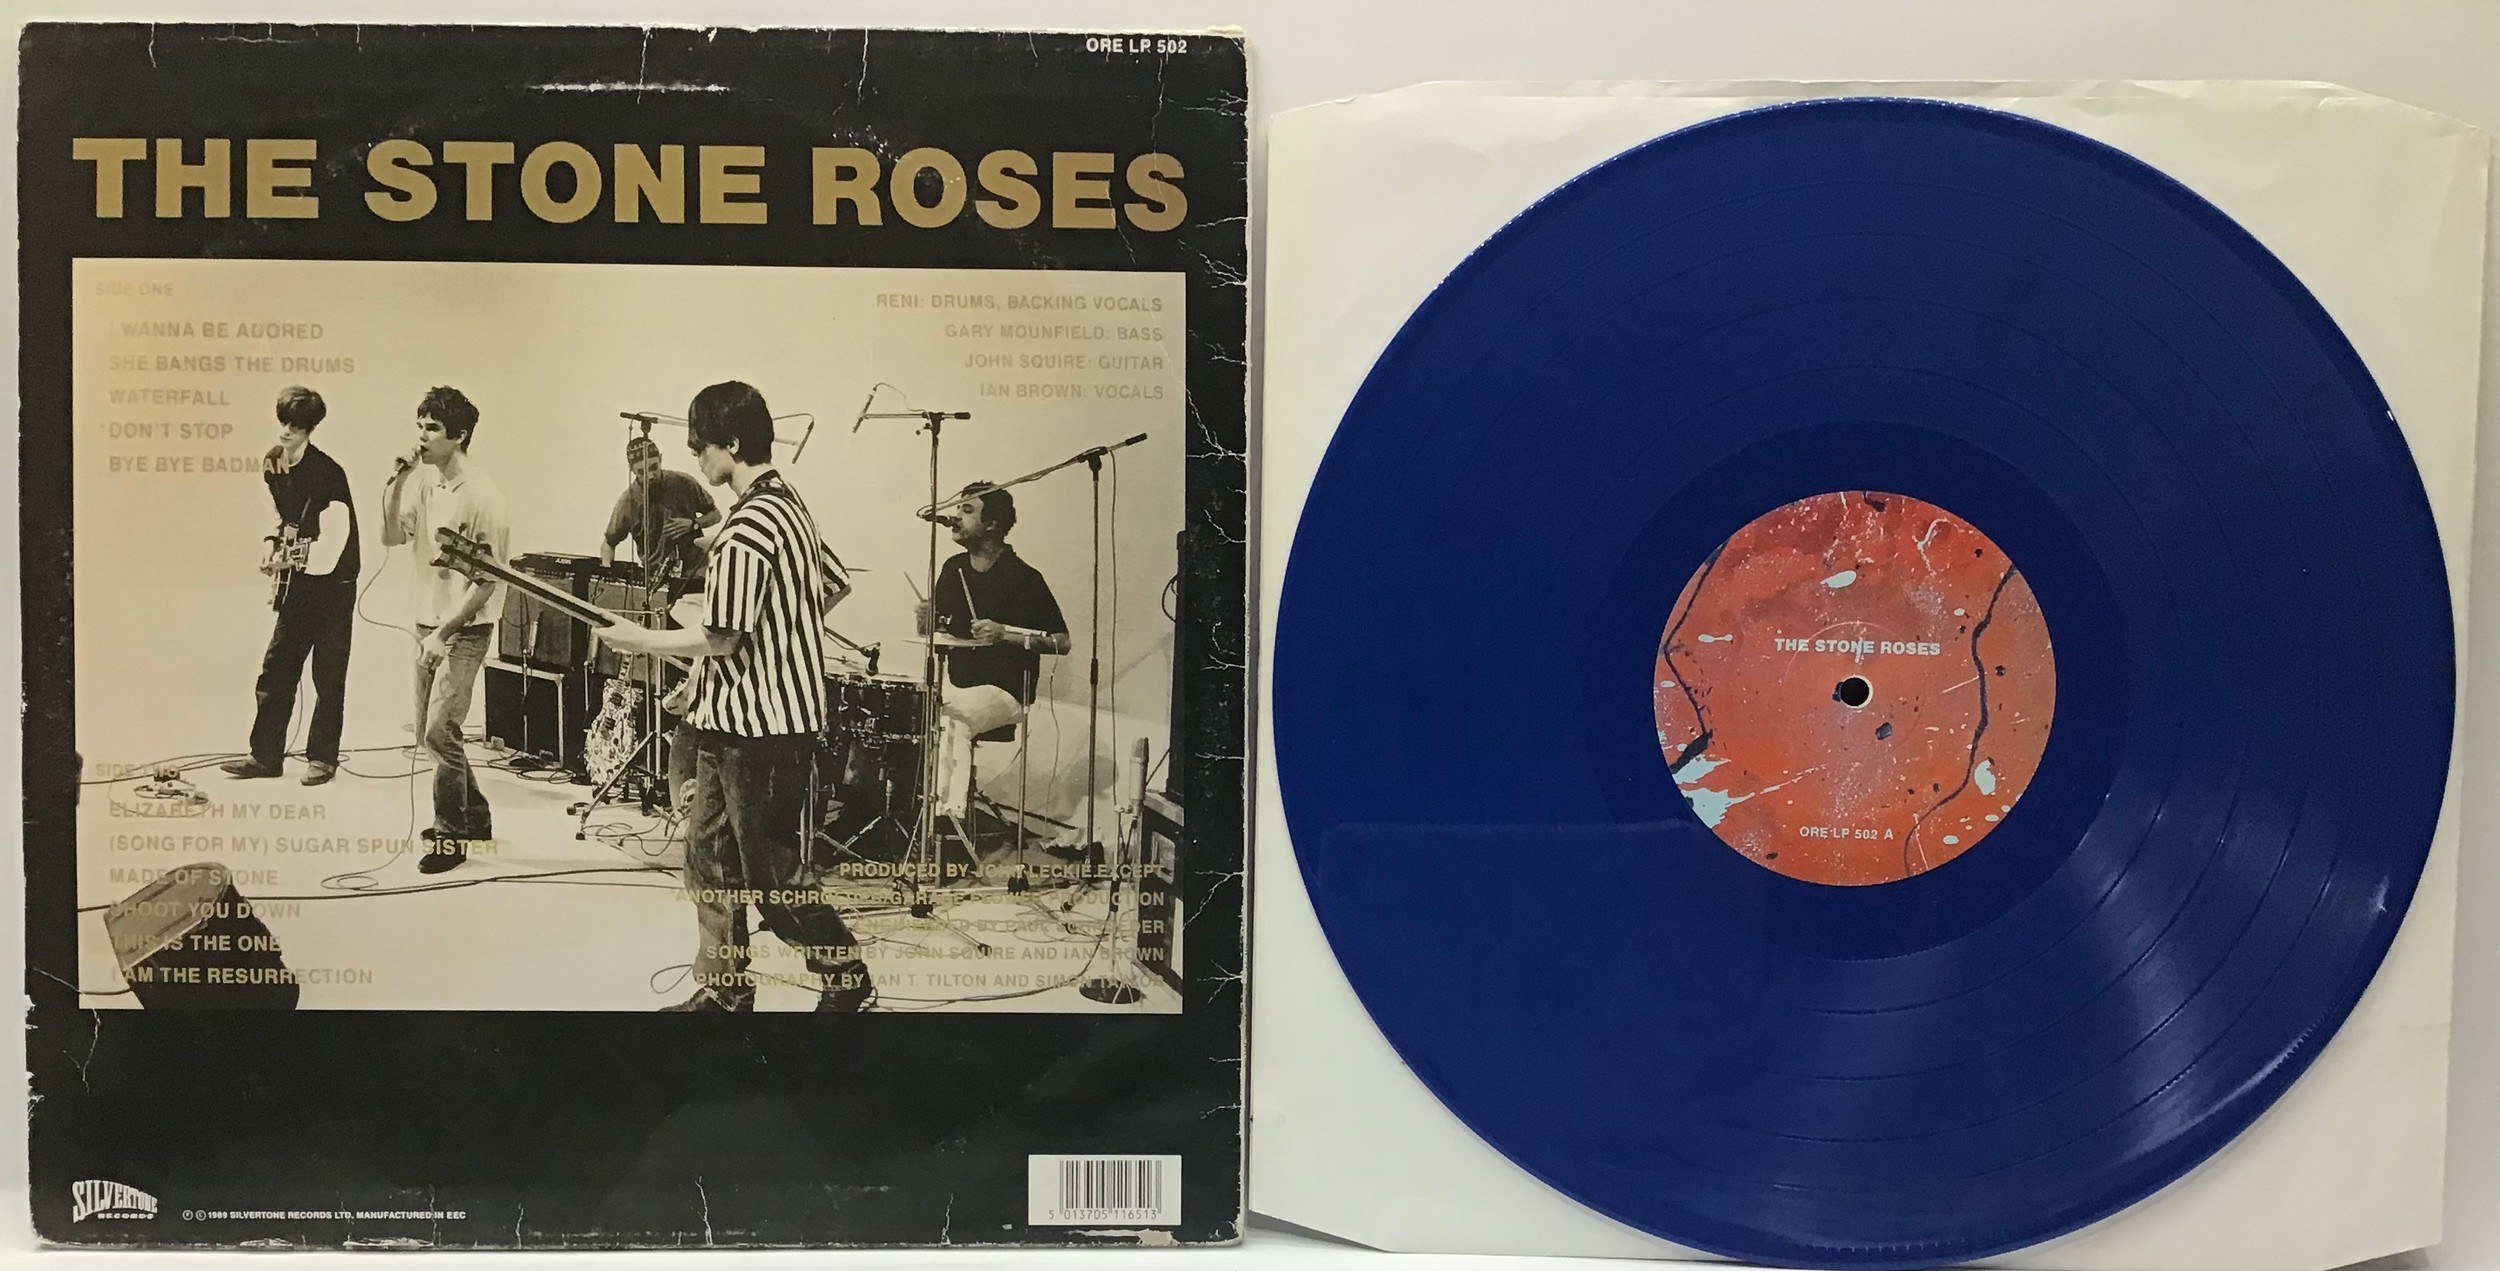 THE STONE ROSES - “STONE RORSES” BLUE VINYL LP. Self titled album from 1989 pressed on Silvertone - Image 2 of 2